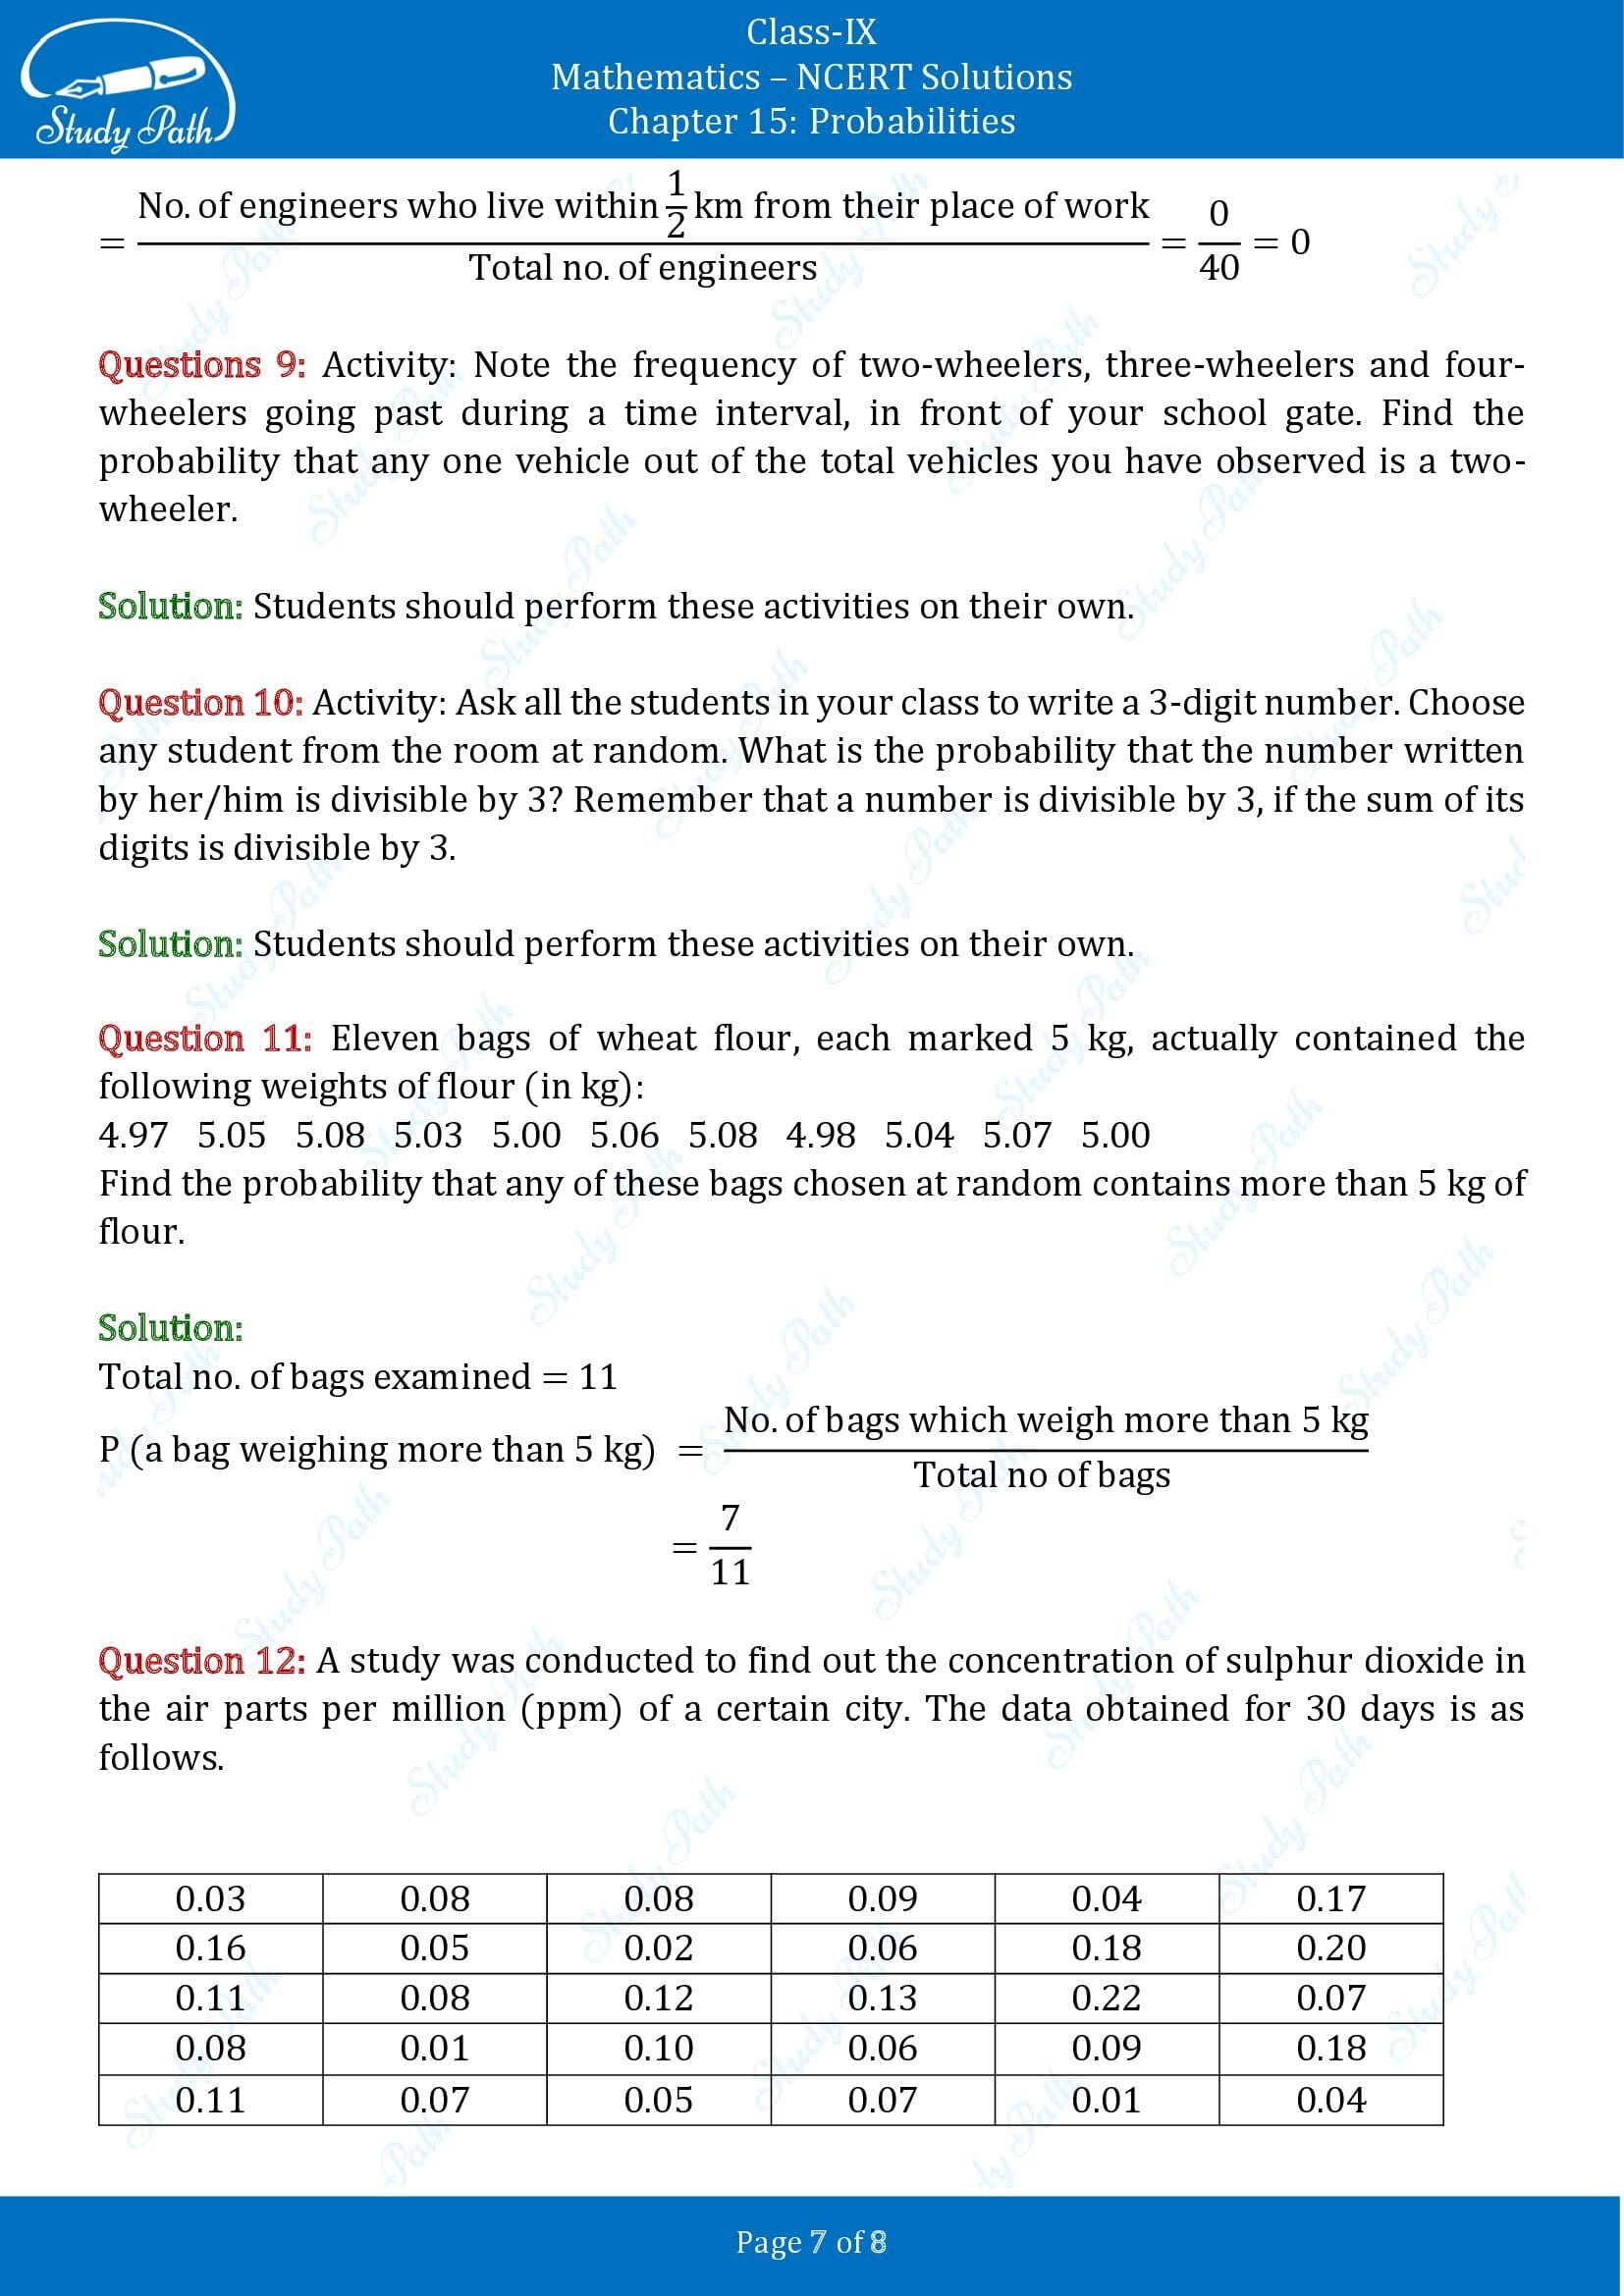 NCERT Solutions for Class 9 Maths Chapter 15 Probabilities 00007